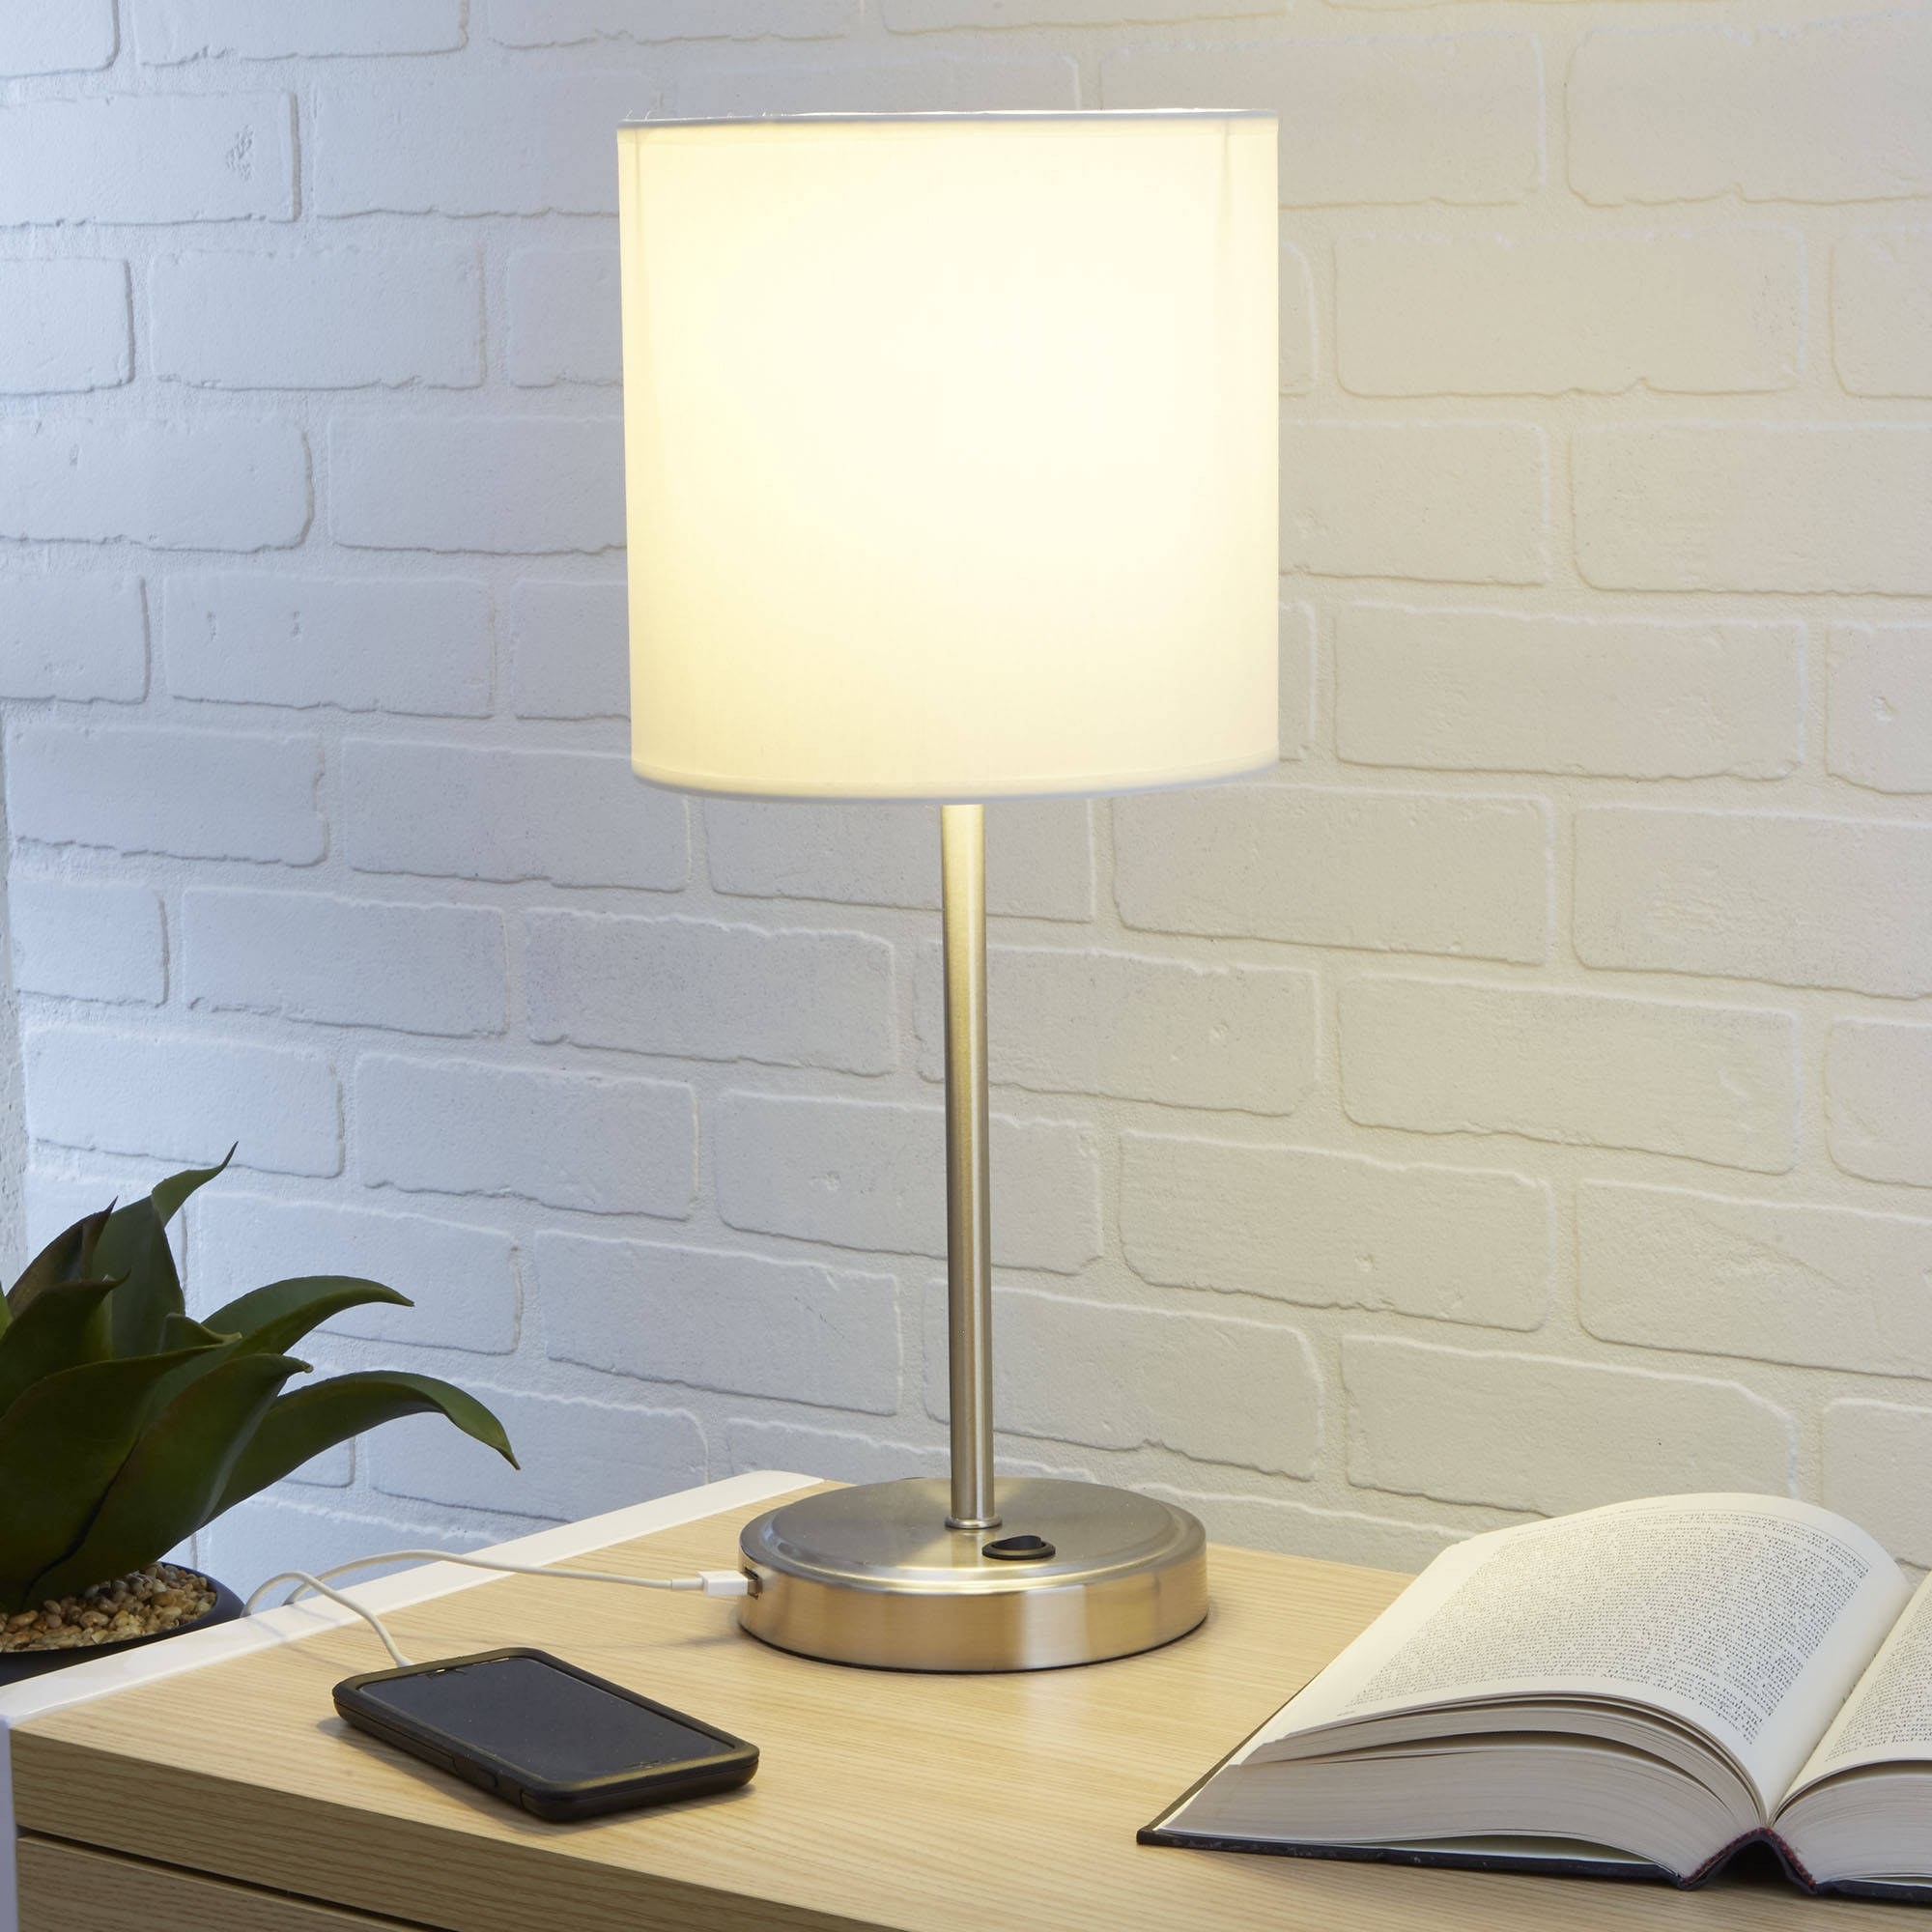 The lamp has a silver base, a white lampshade and has a warm yellow light turned on